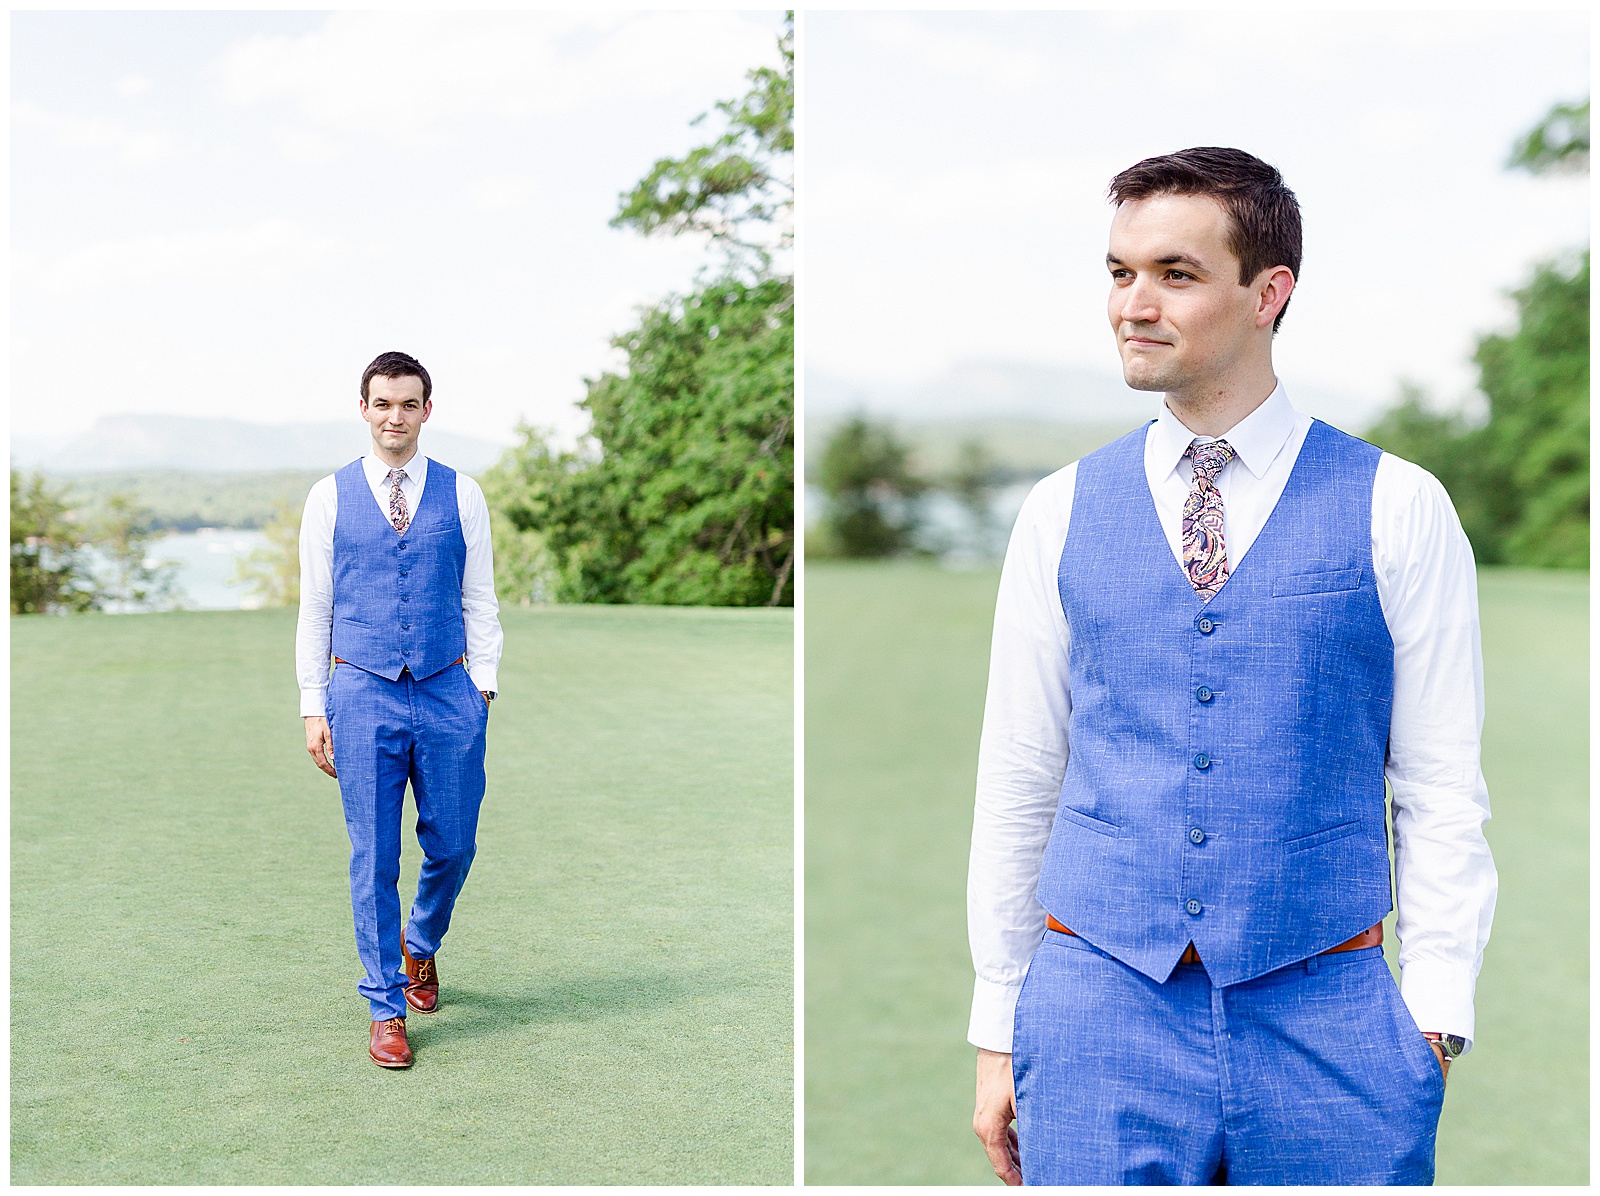 Blue Themed Suit Groom Portraits at Outdoorsy Summer Wedding at North Carolina Lakehouse in the Mountains | check out the full wedding at KevynDixonPhoto.com